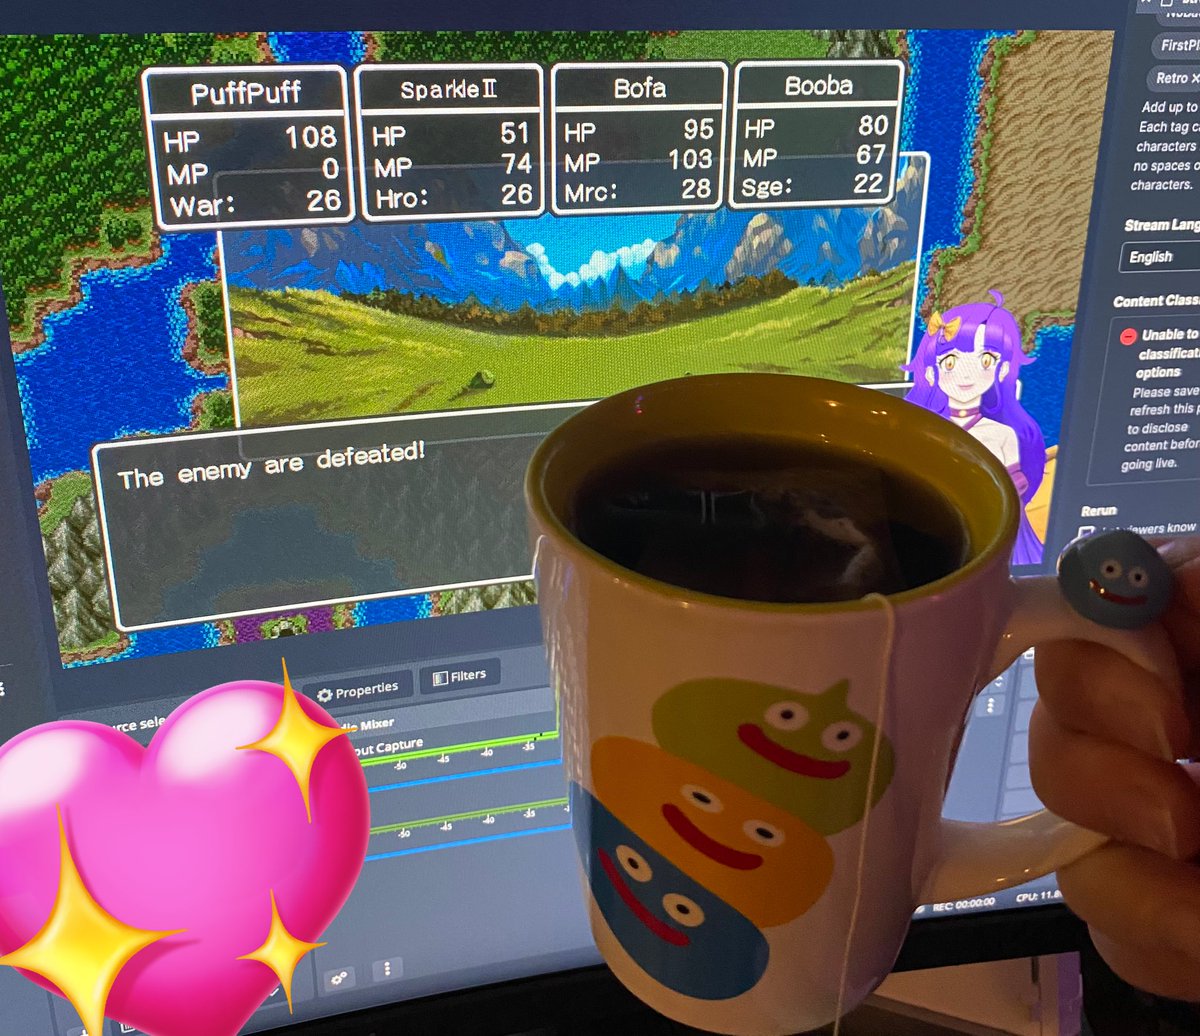 Cheers to more Dragon Quest! Starting now! ✨✨✨